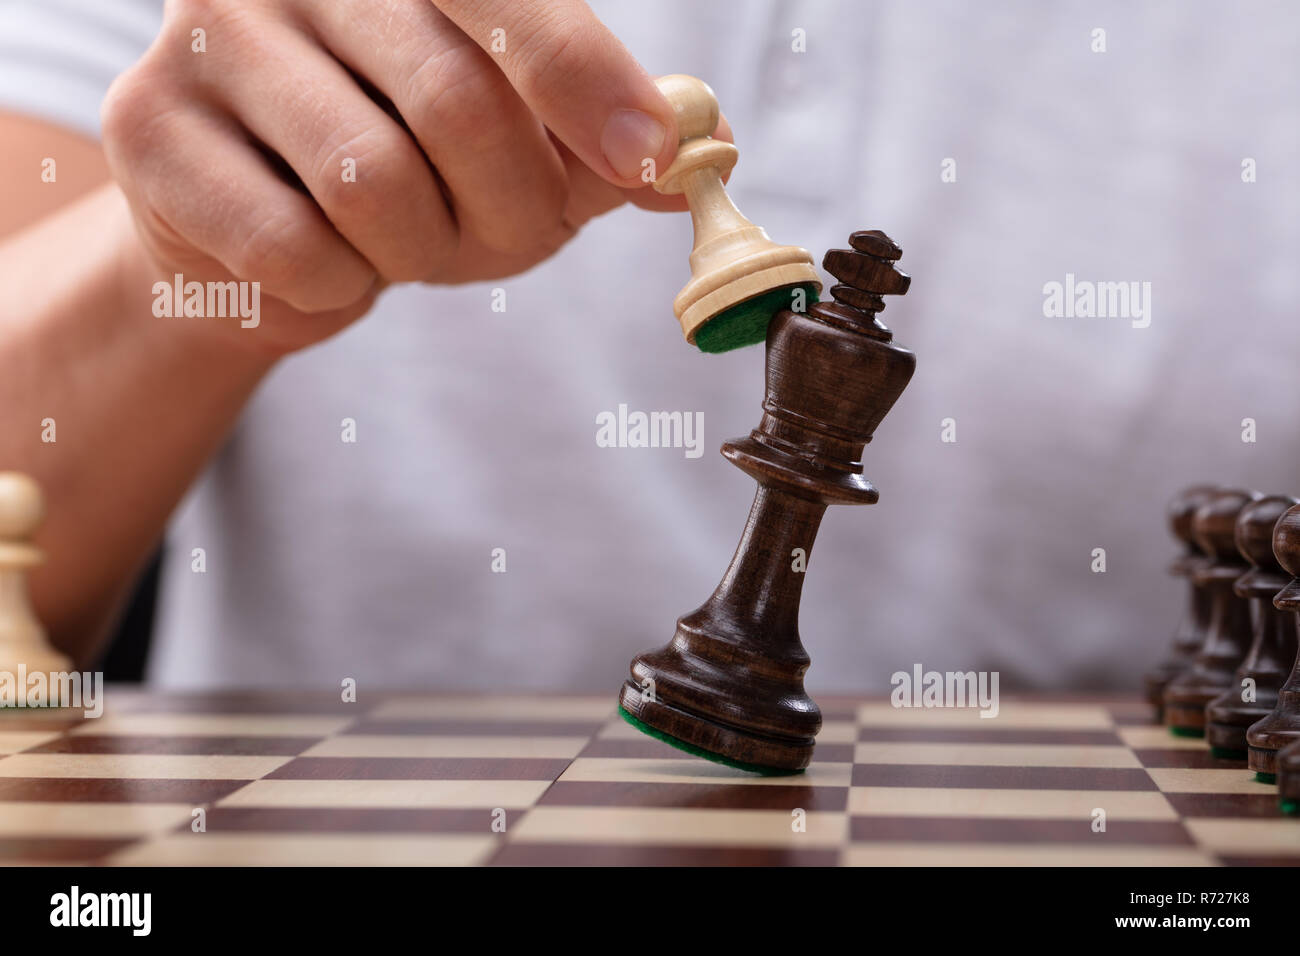 Close-up Of A Man's Hand Defeating King Chess Piece With Pawn Stock Photo